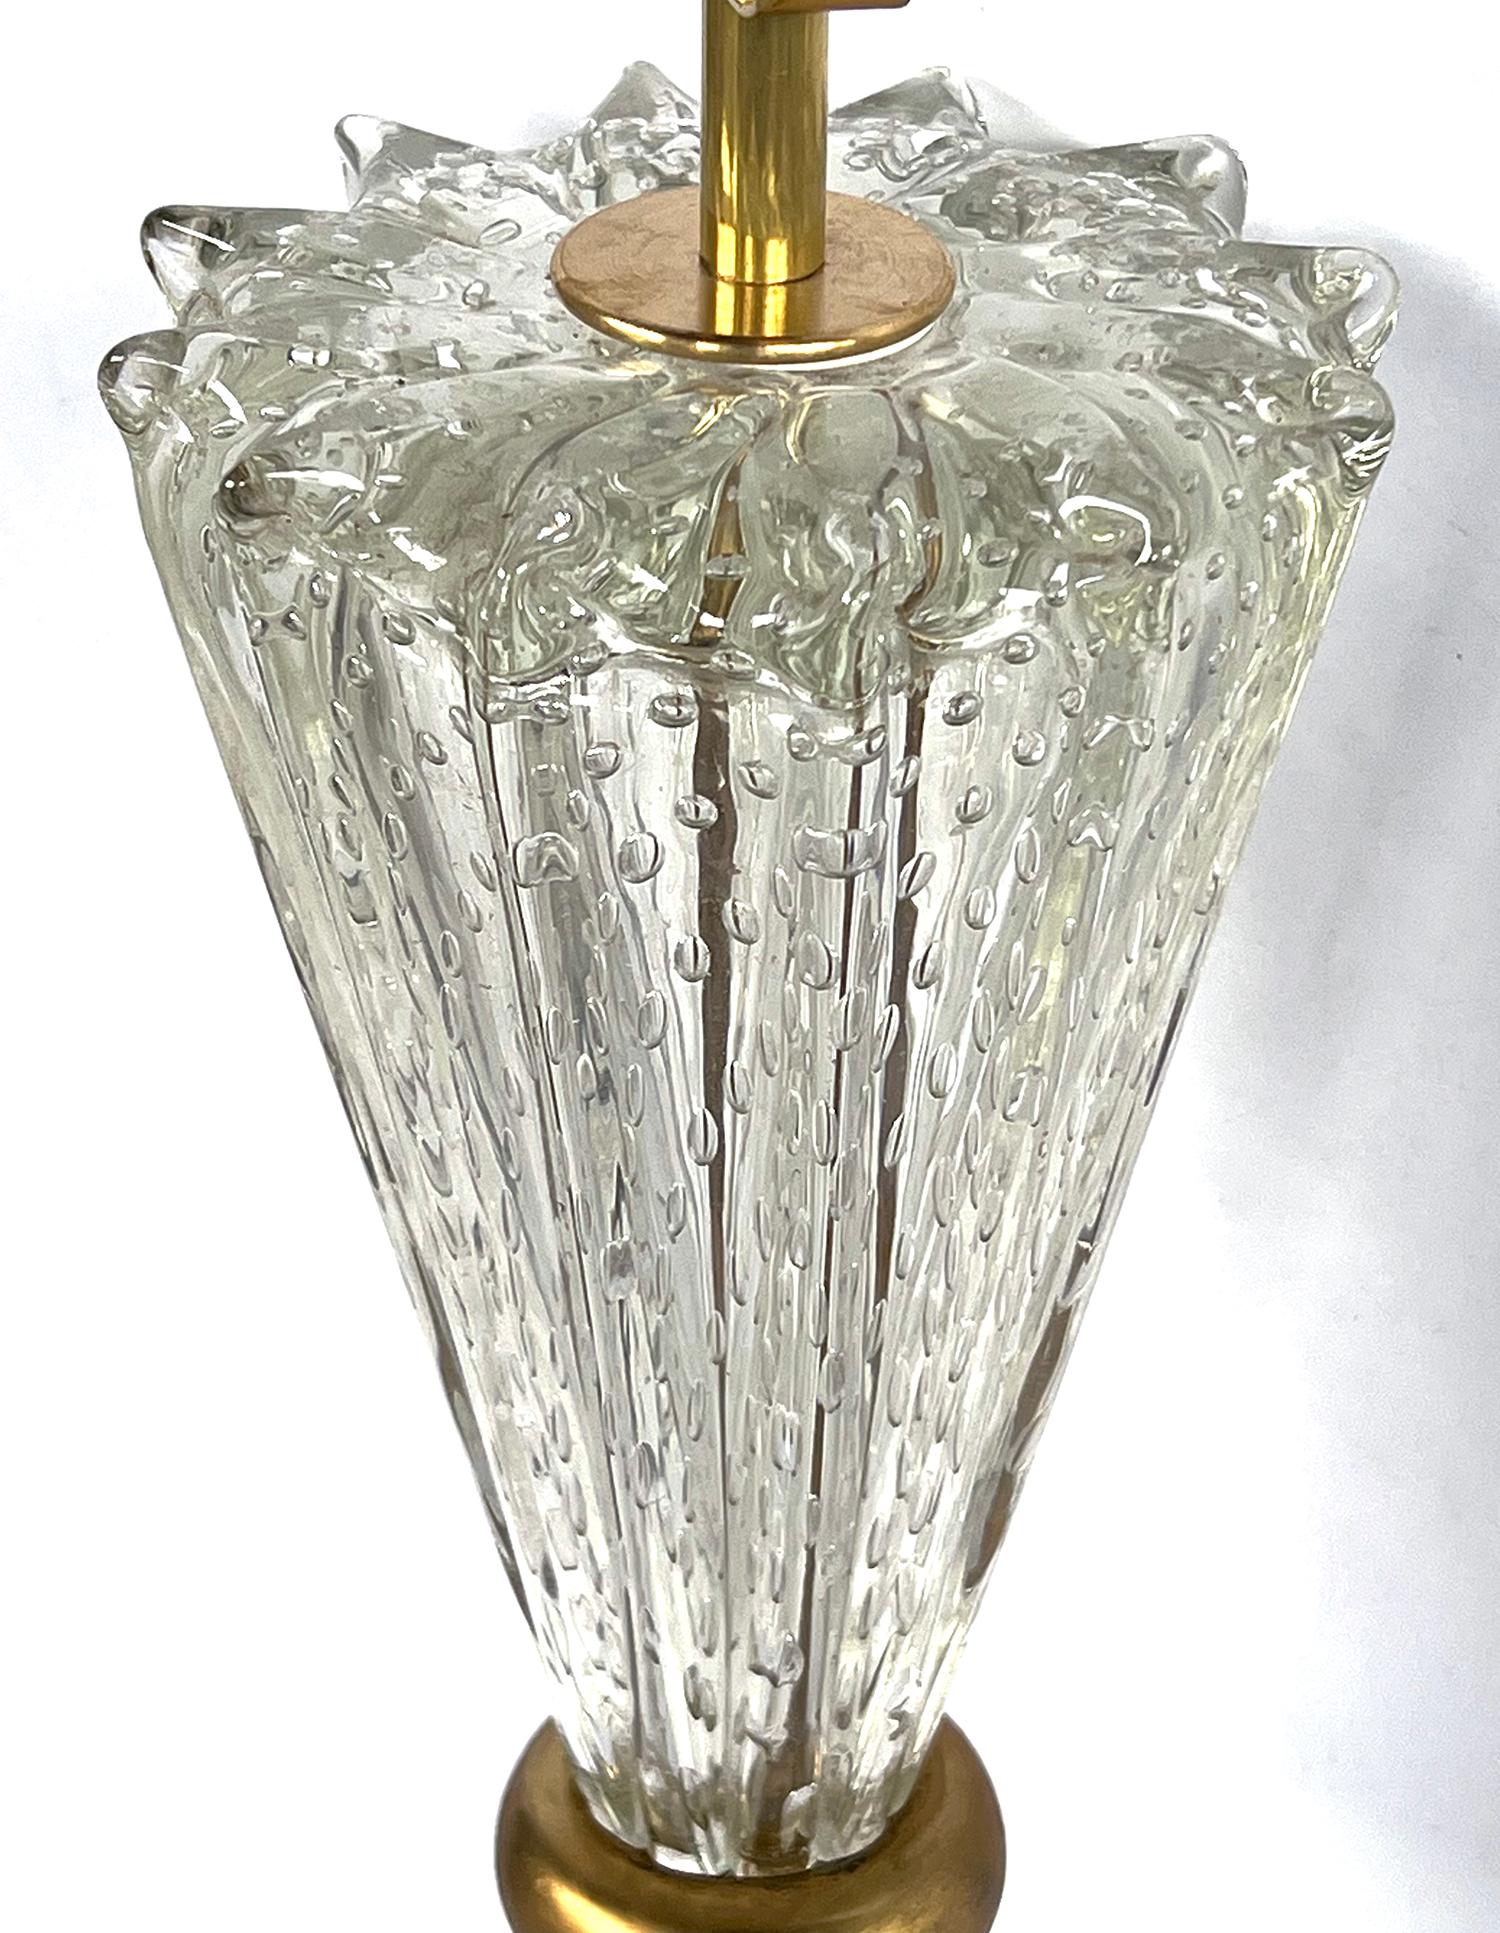 A rare pair of Barovier & Toso 1960s lamps composed of 2 clear bullicante (controlled bubble) conical form glass elements forming a pinched mid-section with gilt-metal ring.